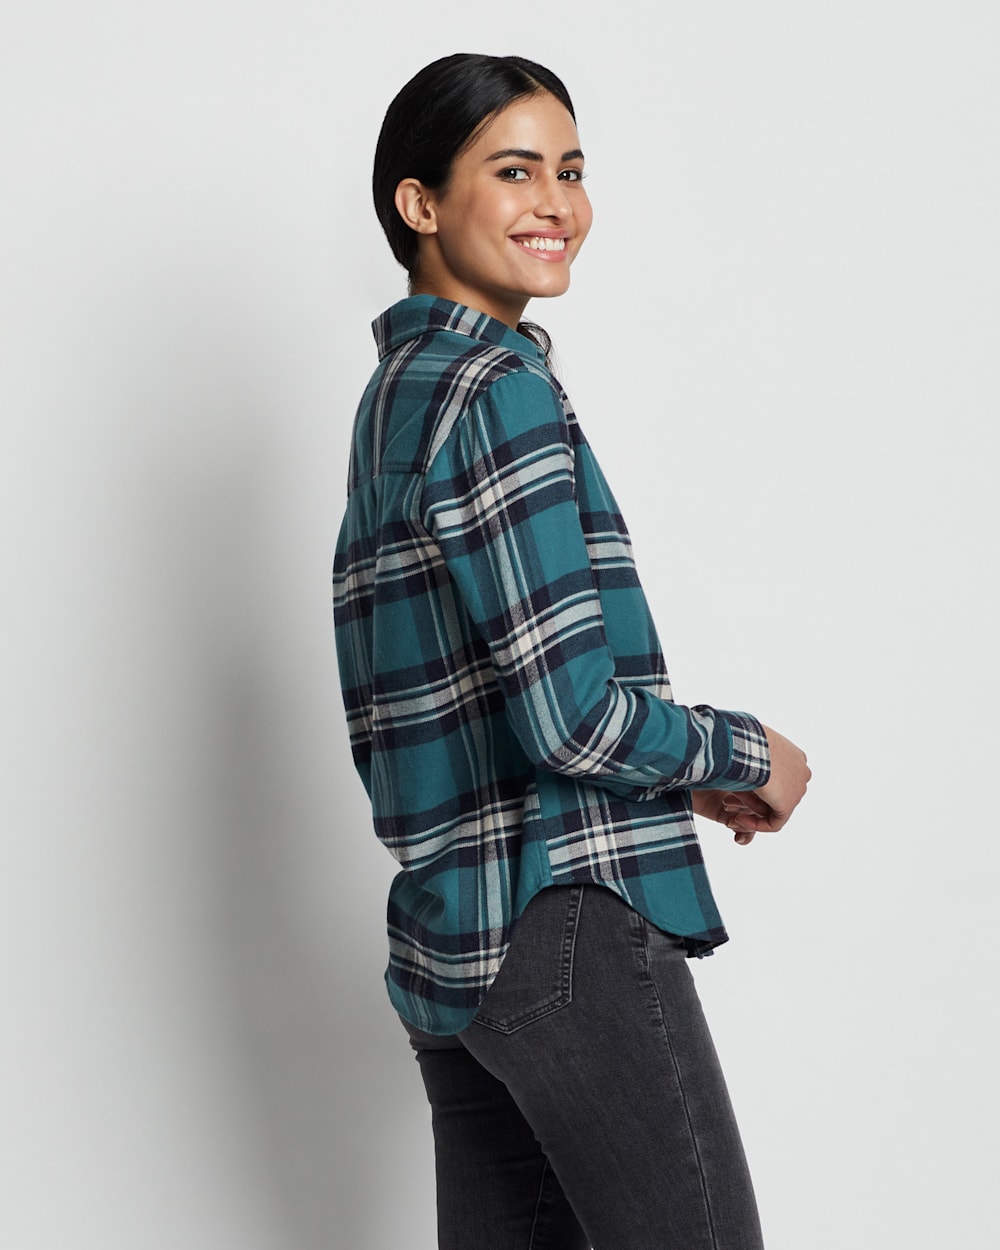 ALTERNATE VIEW OF WOMEN'S BOYFRIEND DOUBLEBRUSHED FLANNEL SHIRT IN BALSAM/IVORY PLAID image number 4